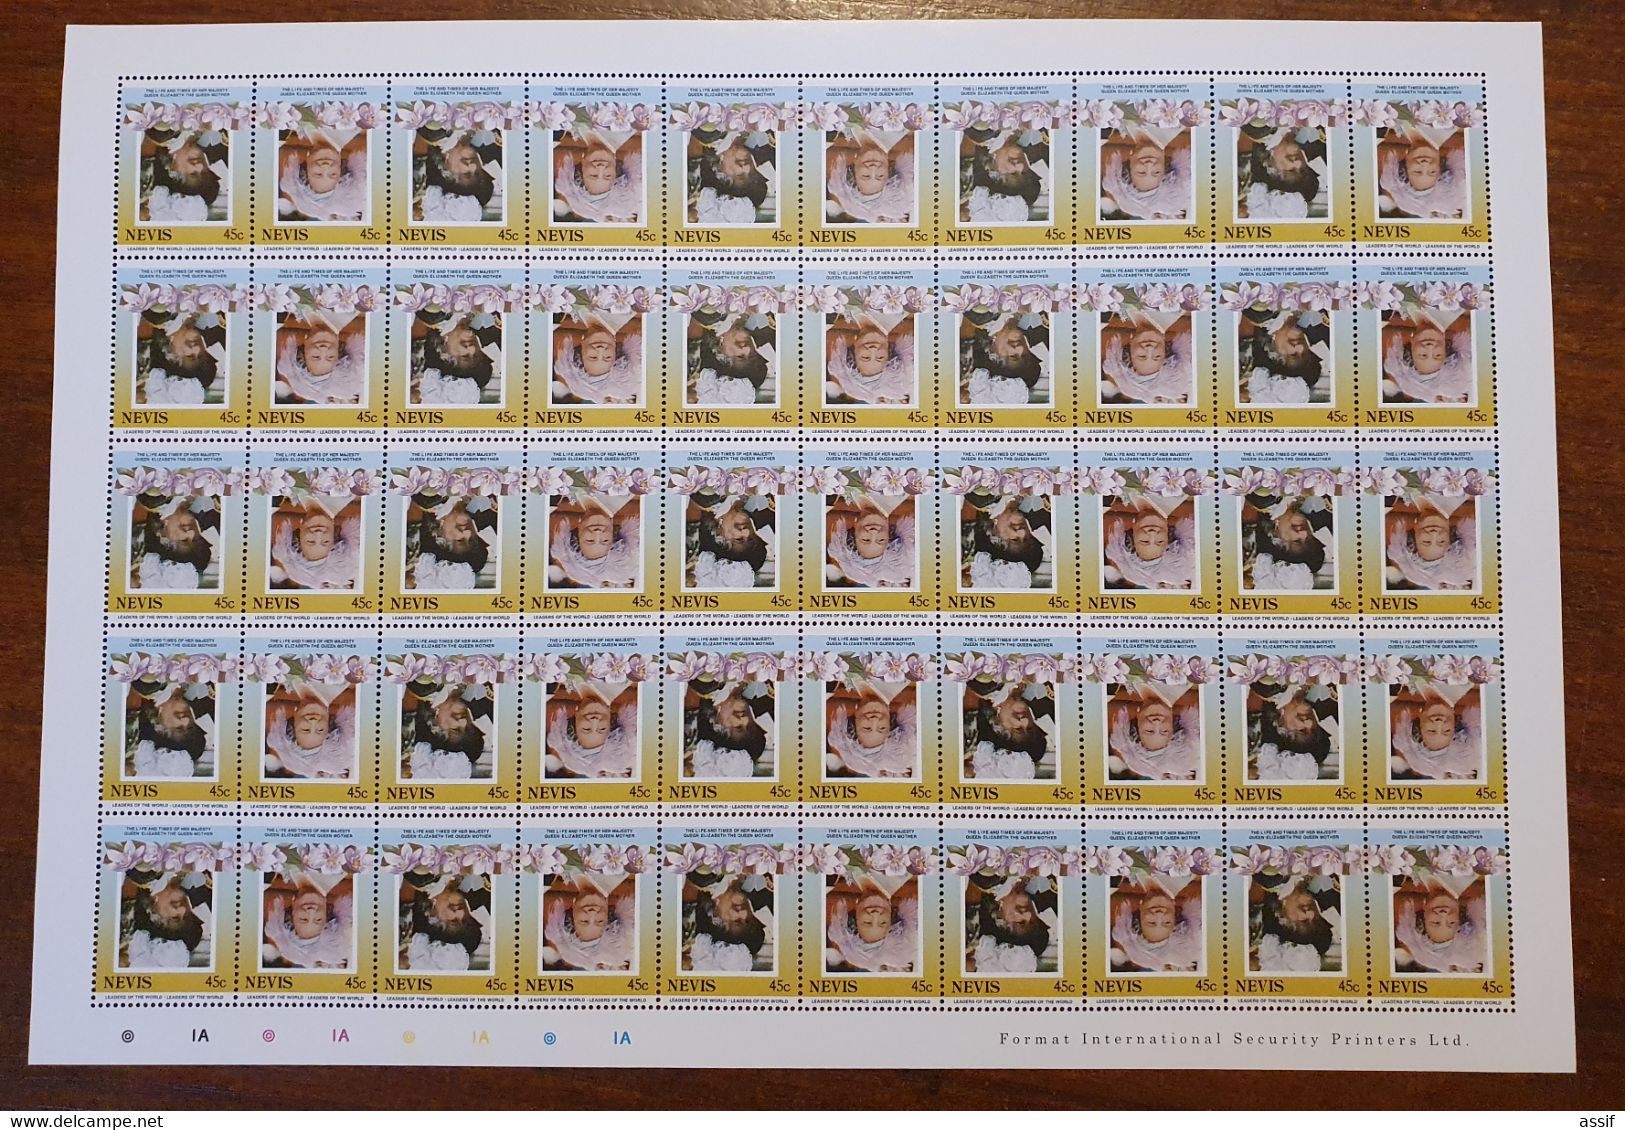 NEVIS 45c 1985 FEUILLE ENTIERE CENTRE RENVERSE SHEET INVERTED YT 311 Et 312 50 TIMBRES NEUFS ** /FREE SHIPPING R - St.Kitts Y Nevis ( 1983-...)